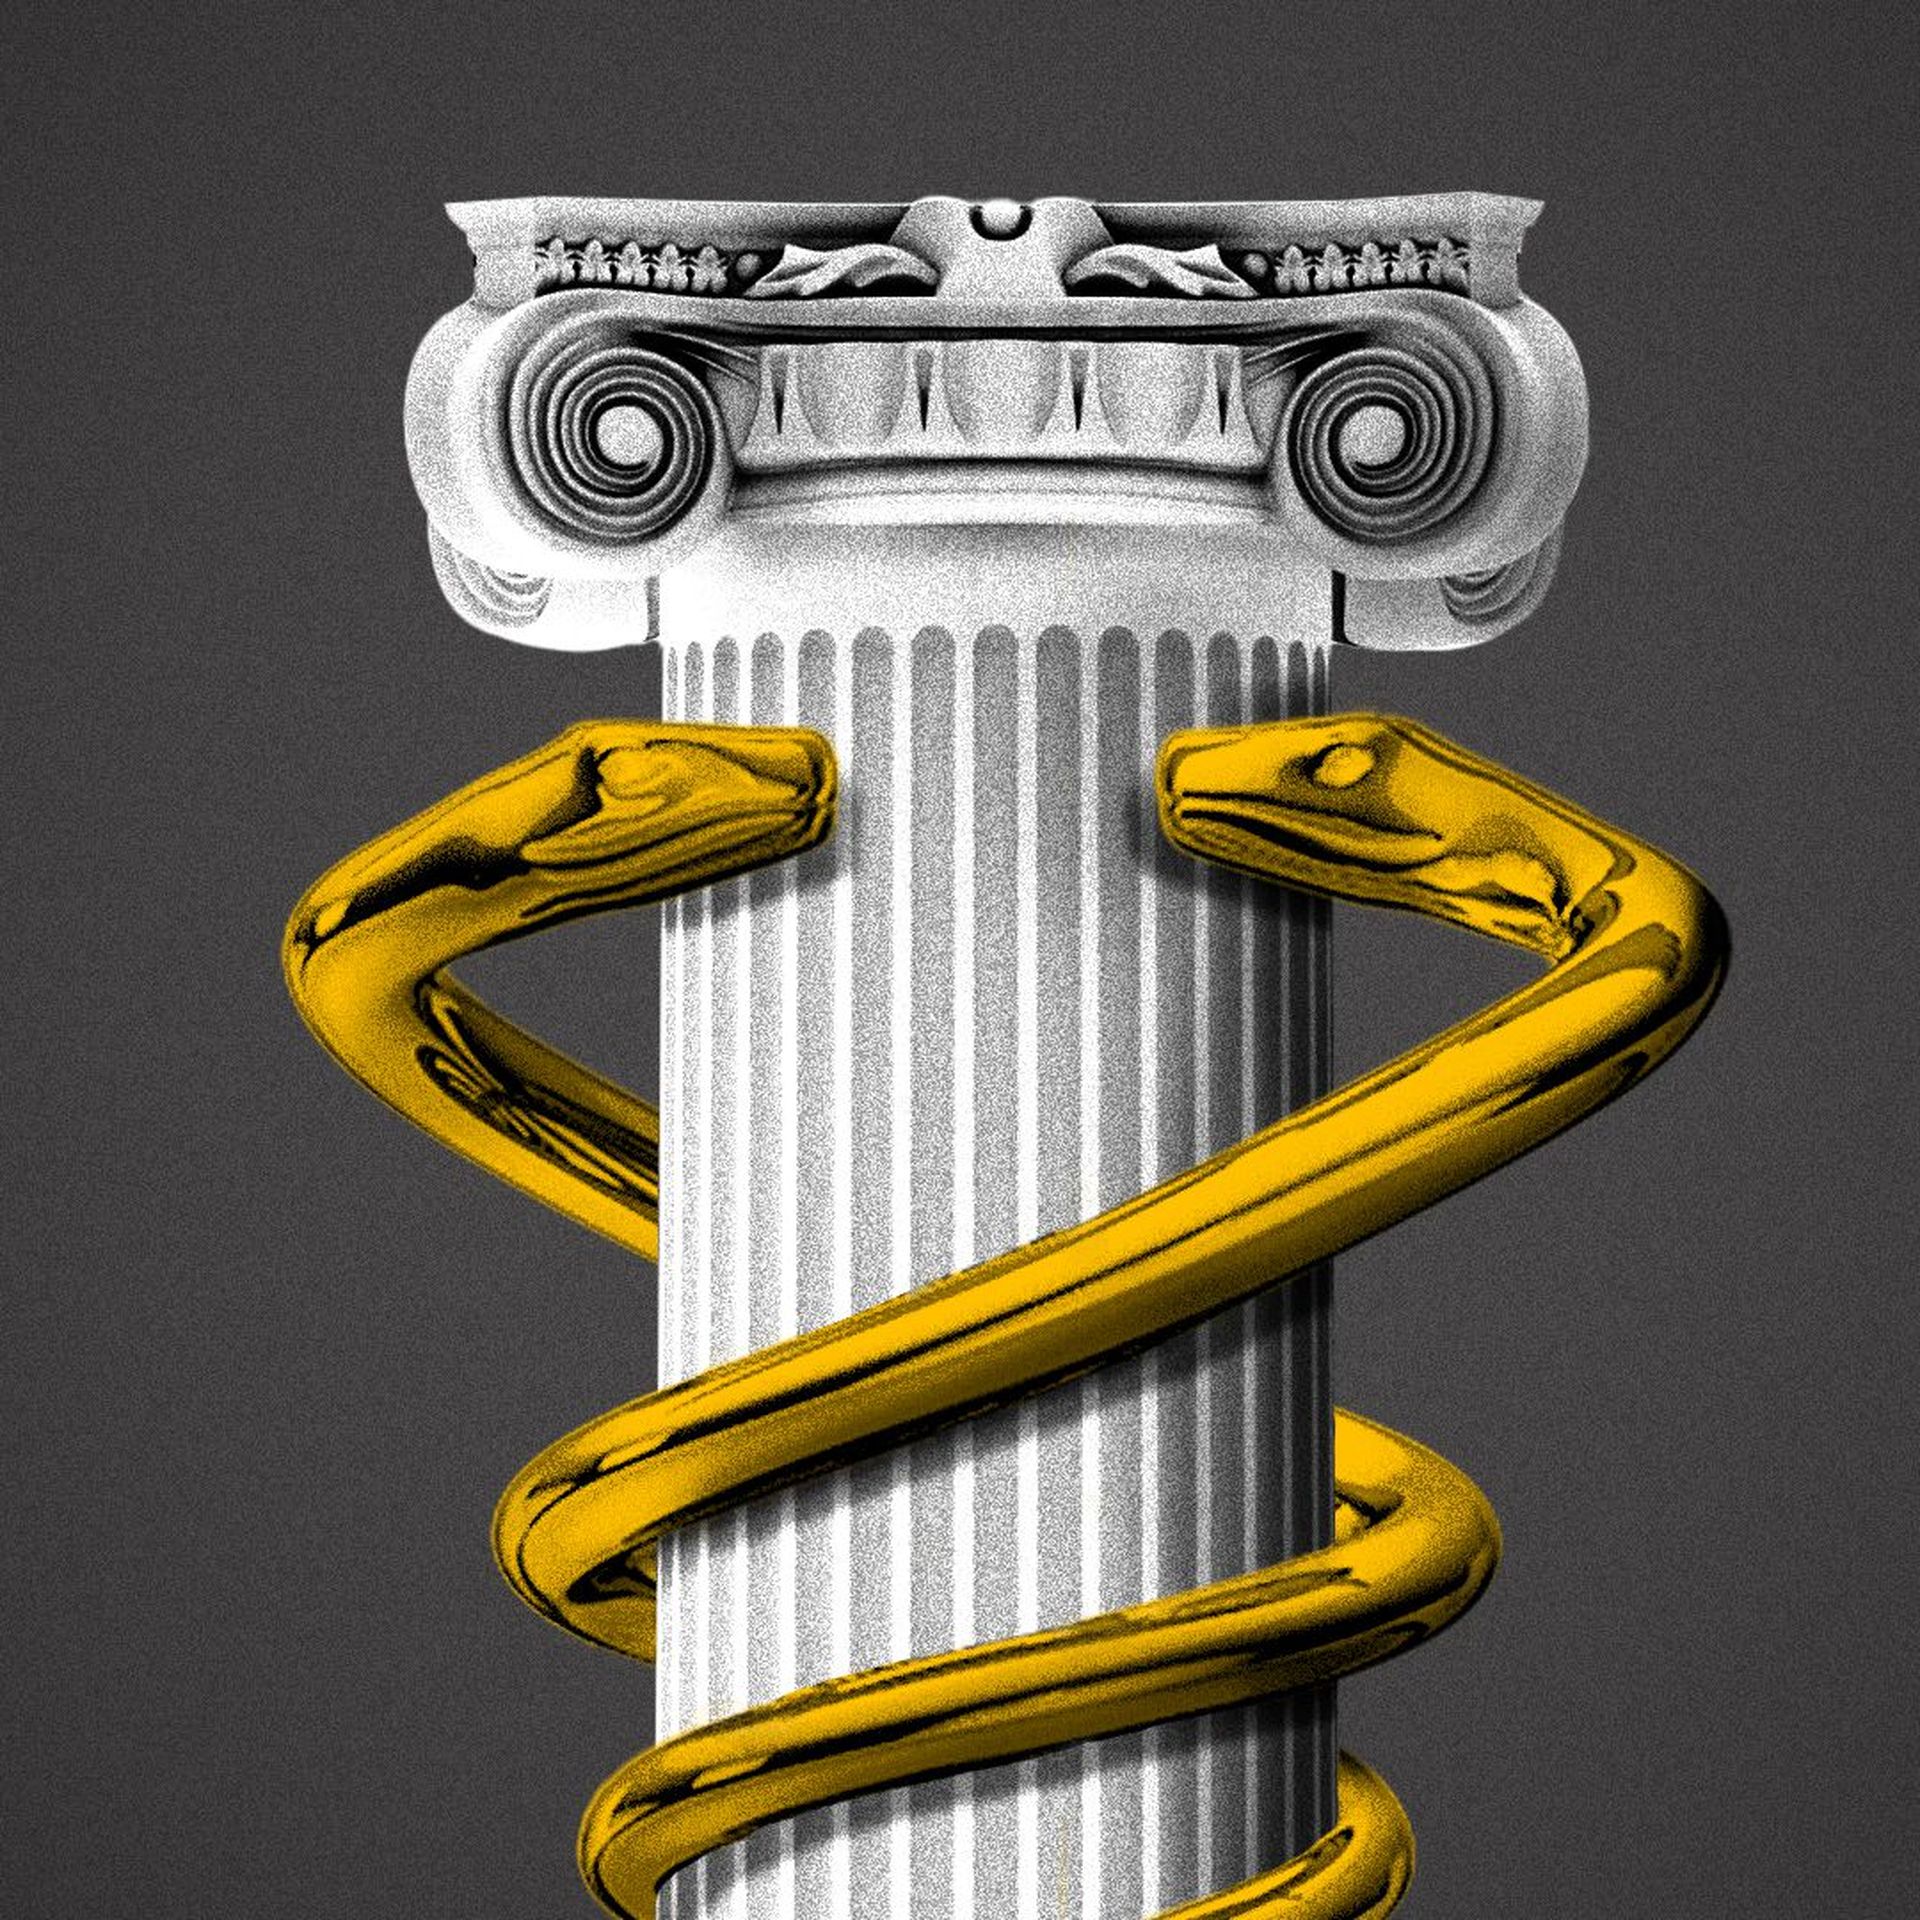 Illustration of a column wrapped in snakes from a caduceus.